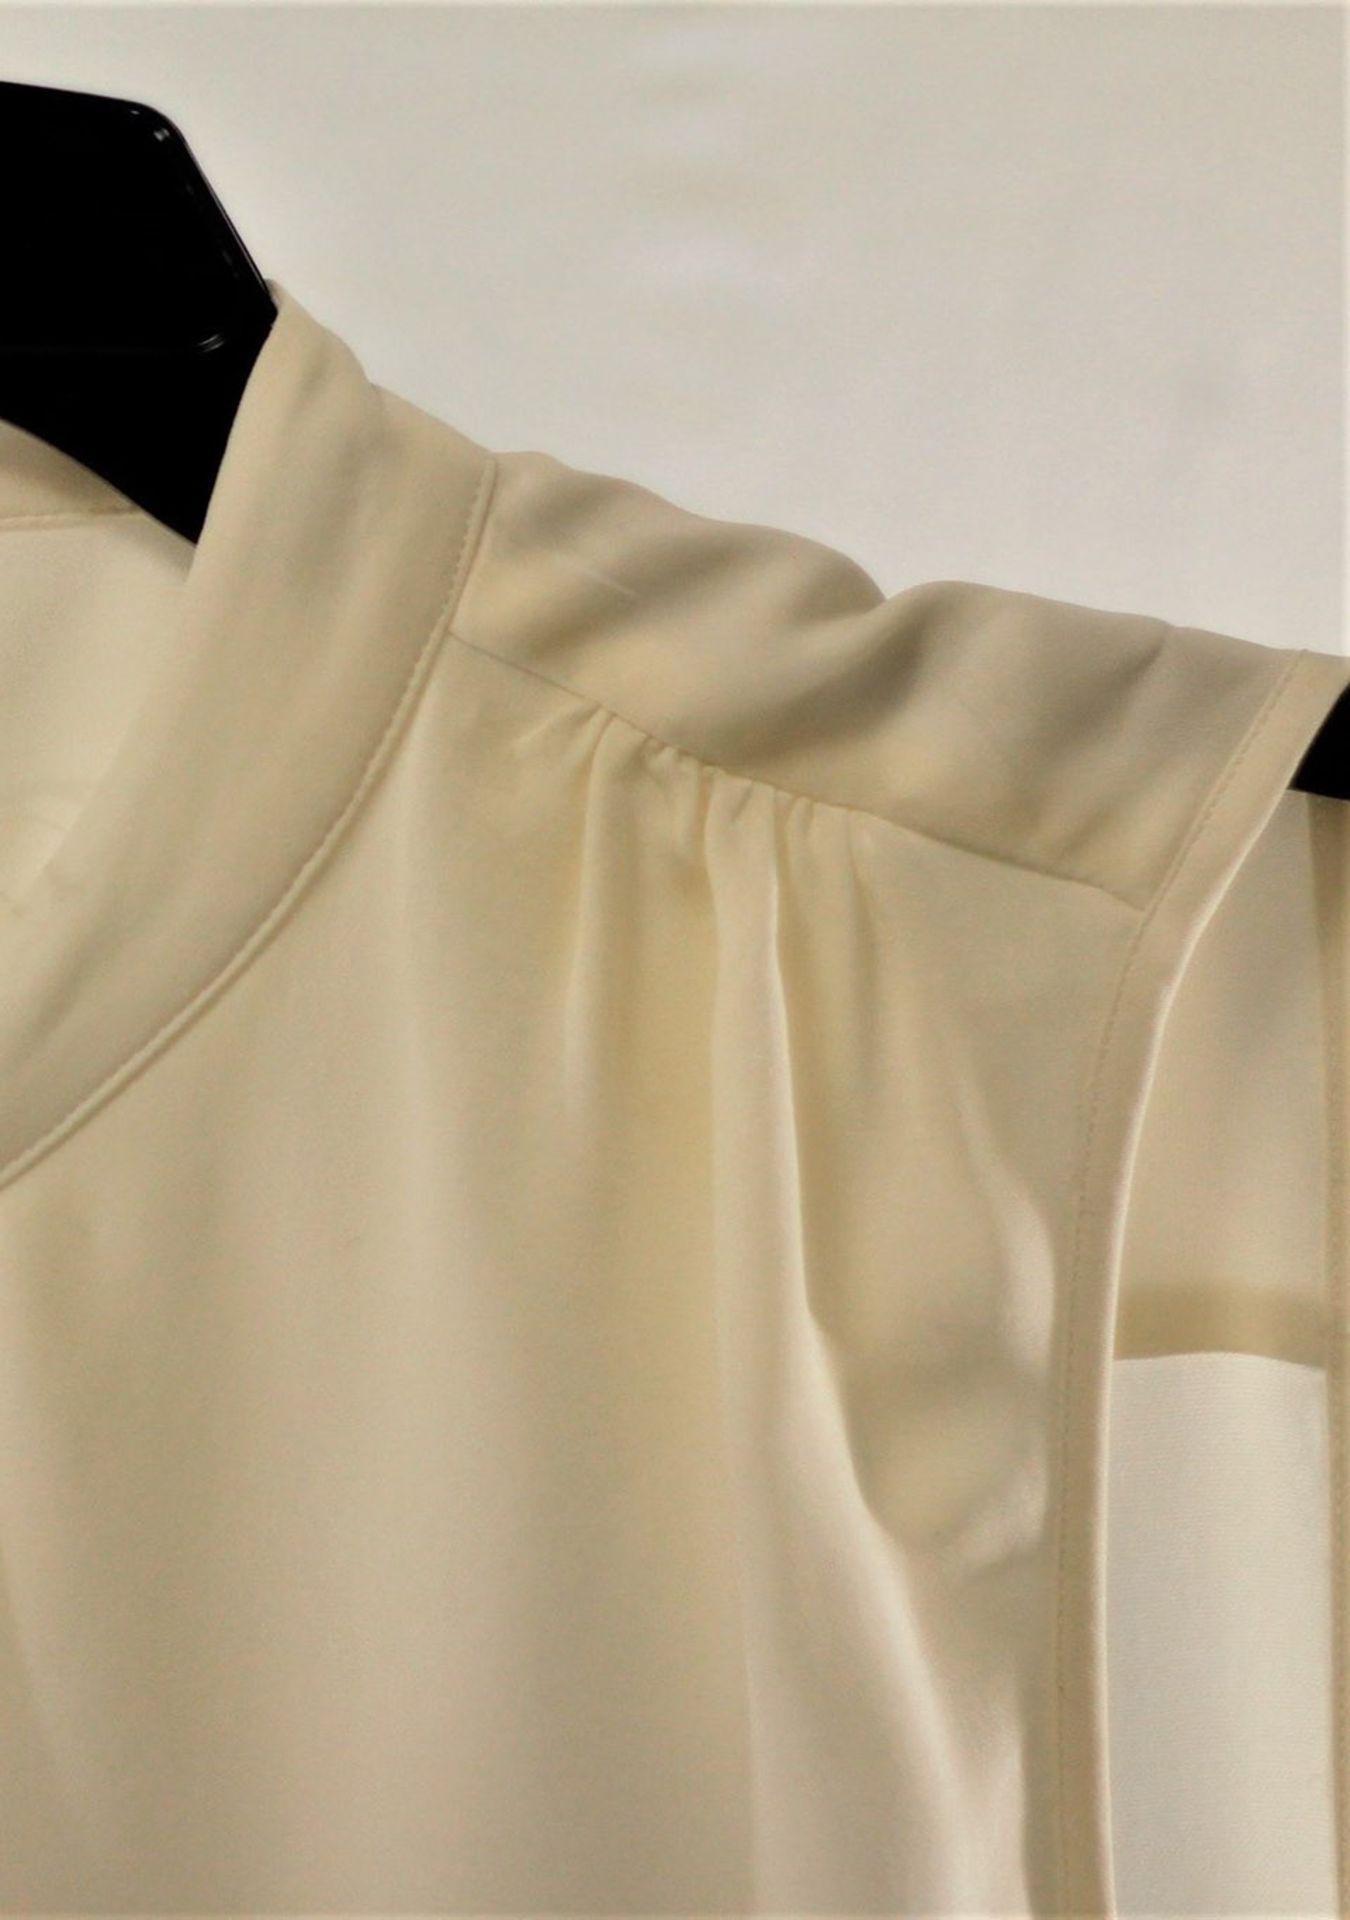 1 x Michael Kors Cream Blouse - Size: L - Material: 100% Silk - From a High End Clothing Boutique In - Image 4 of 4